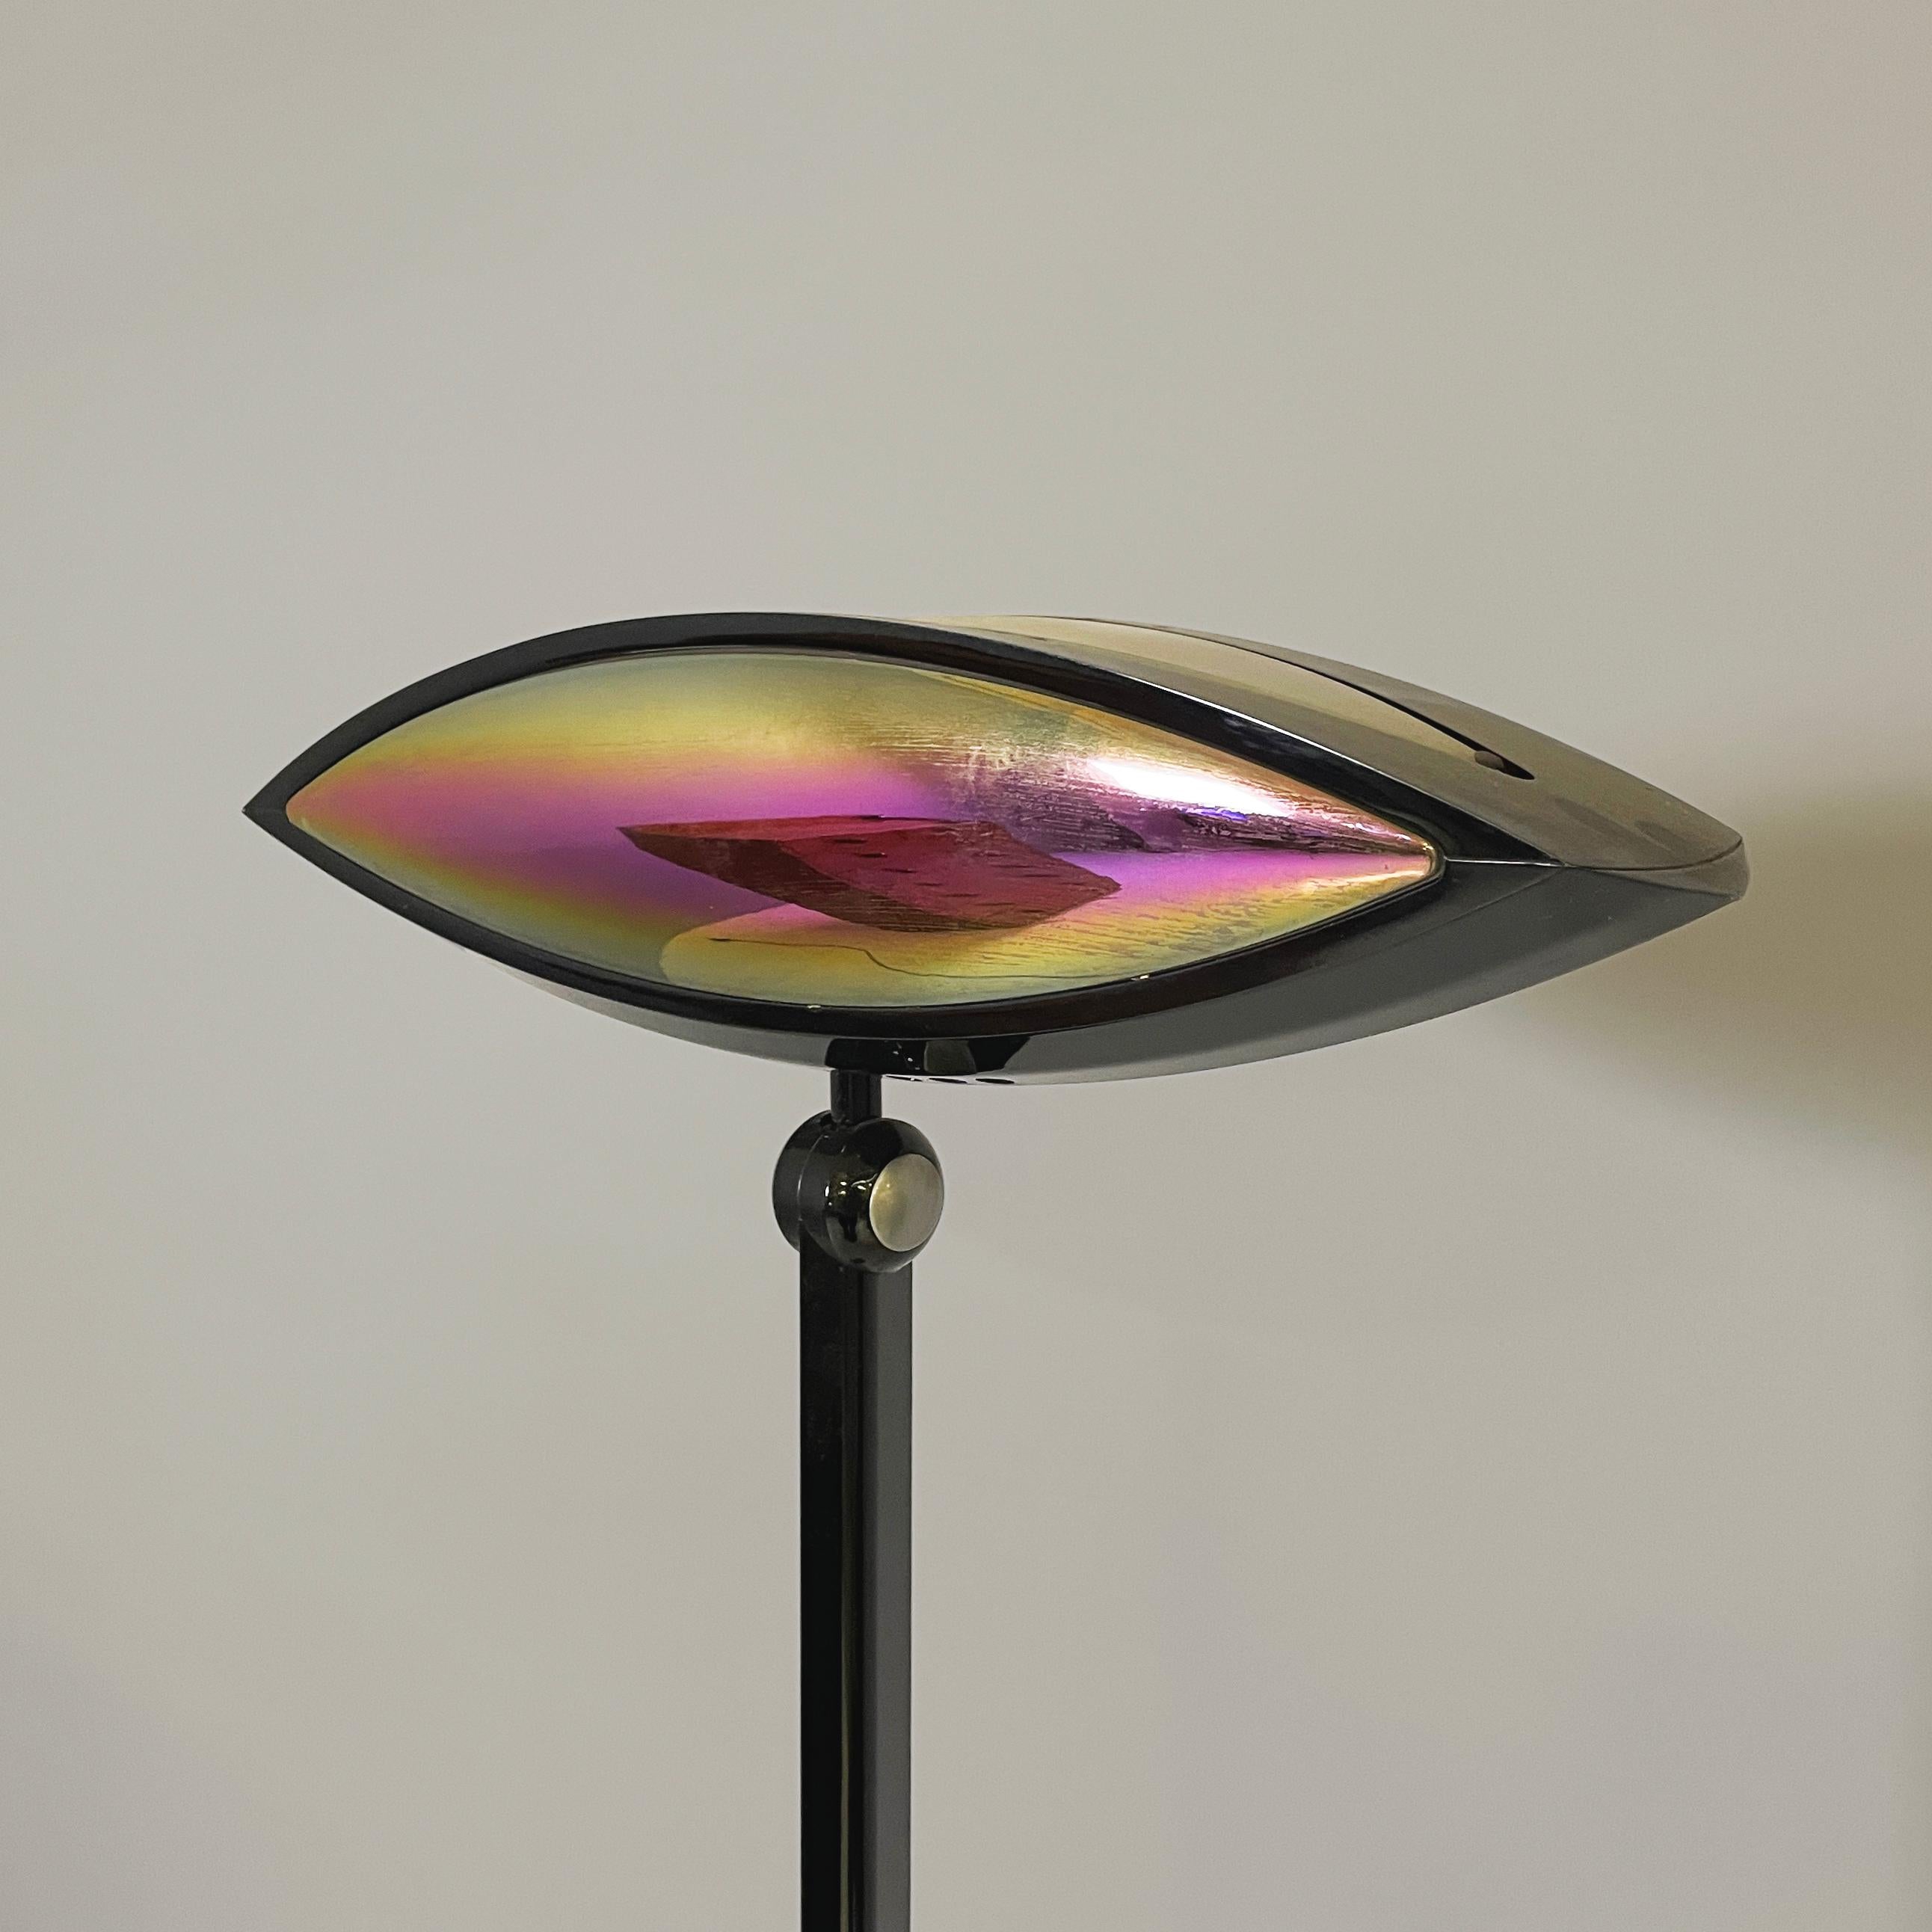 Italian modern color glass and metal Floor lamp Aeto by Lombardo for Flos, 1980s For Sale 2